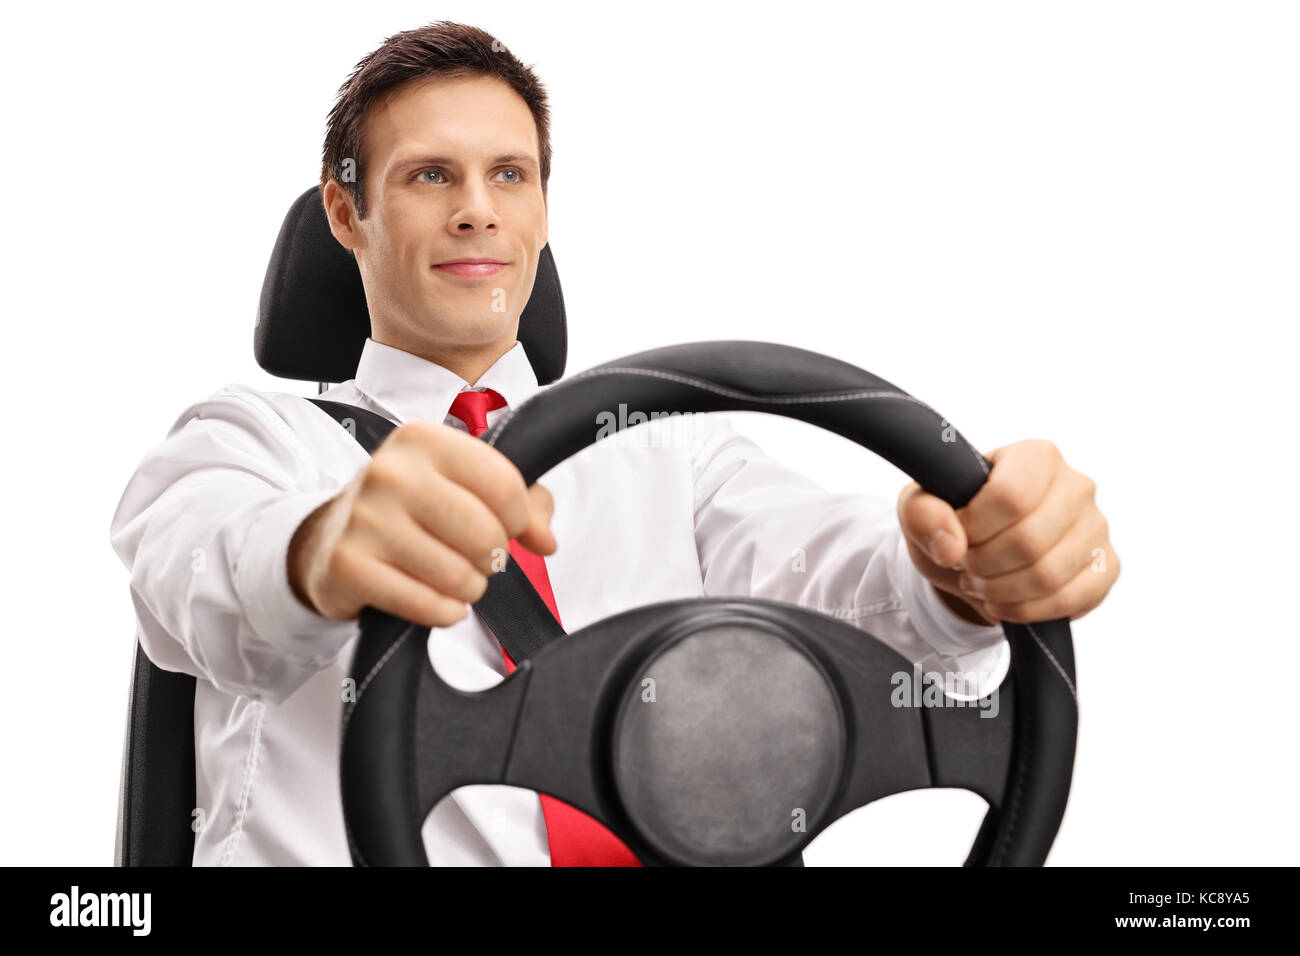 Elegant young man driving isolated on white background Stock Photo